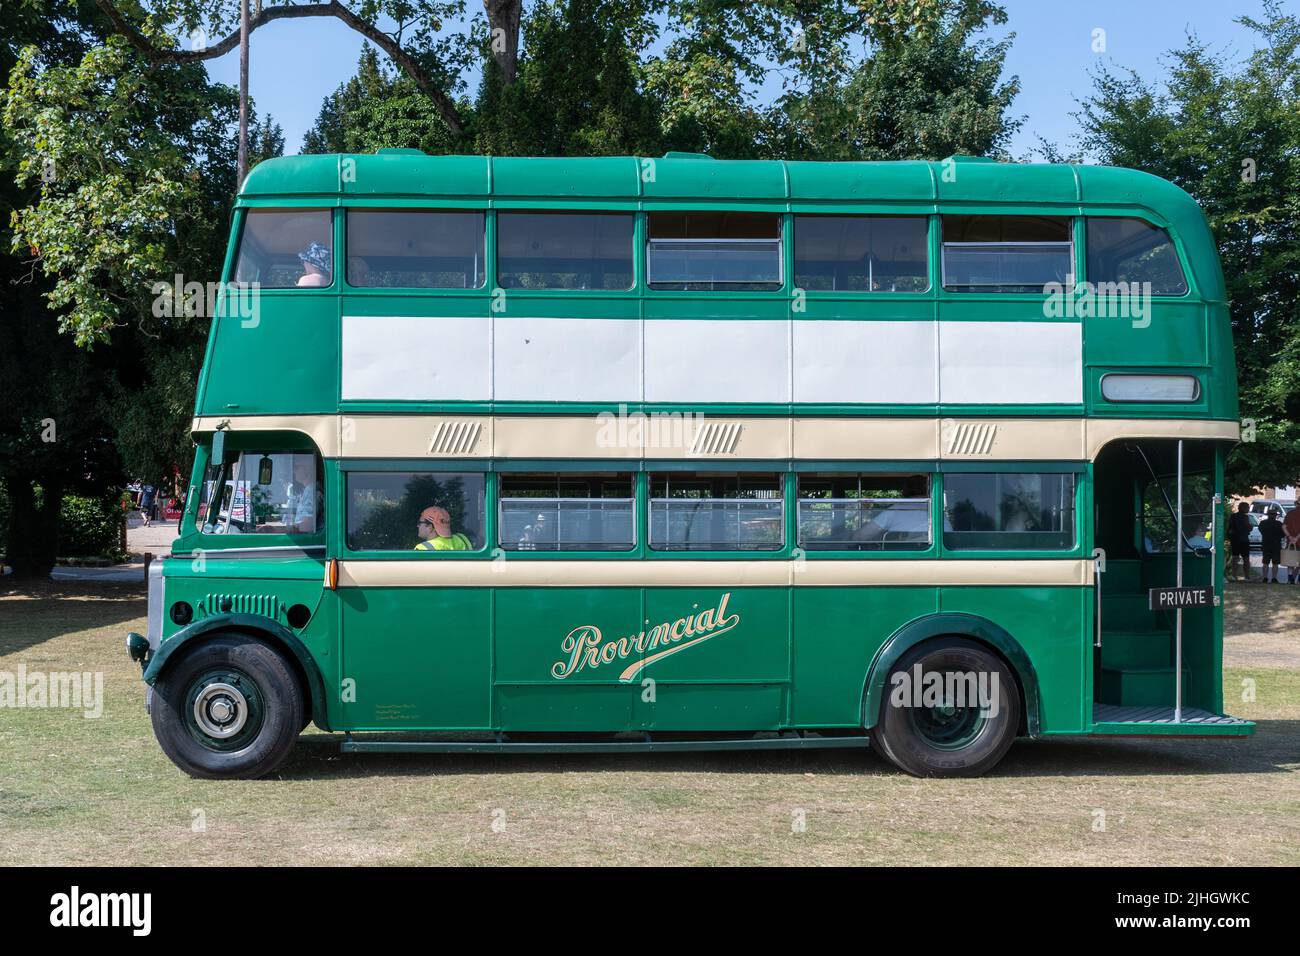 A vintage green 1942 Guy Motors double-decker bus, preserved Provincial bus, at a transport show in Hampshire, England, UK Stock Photo